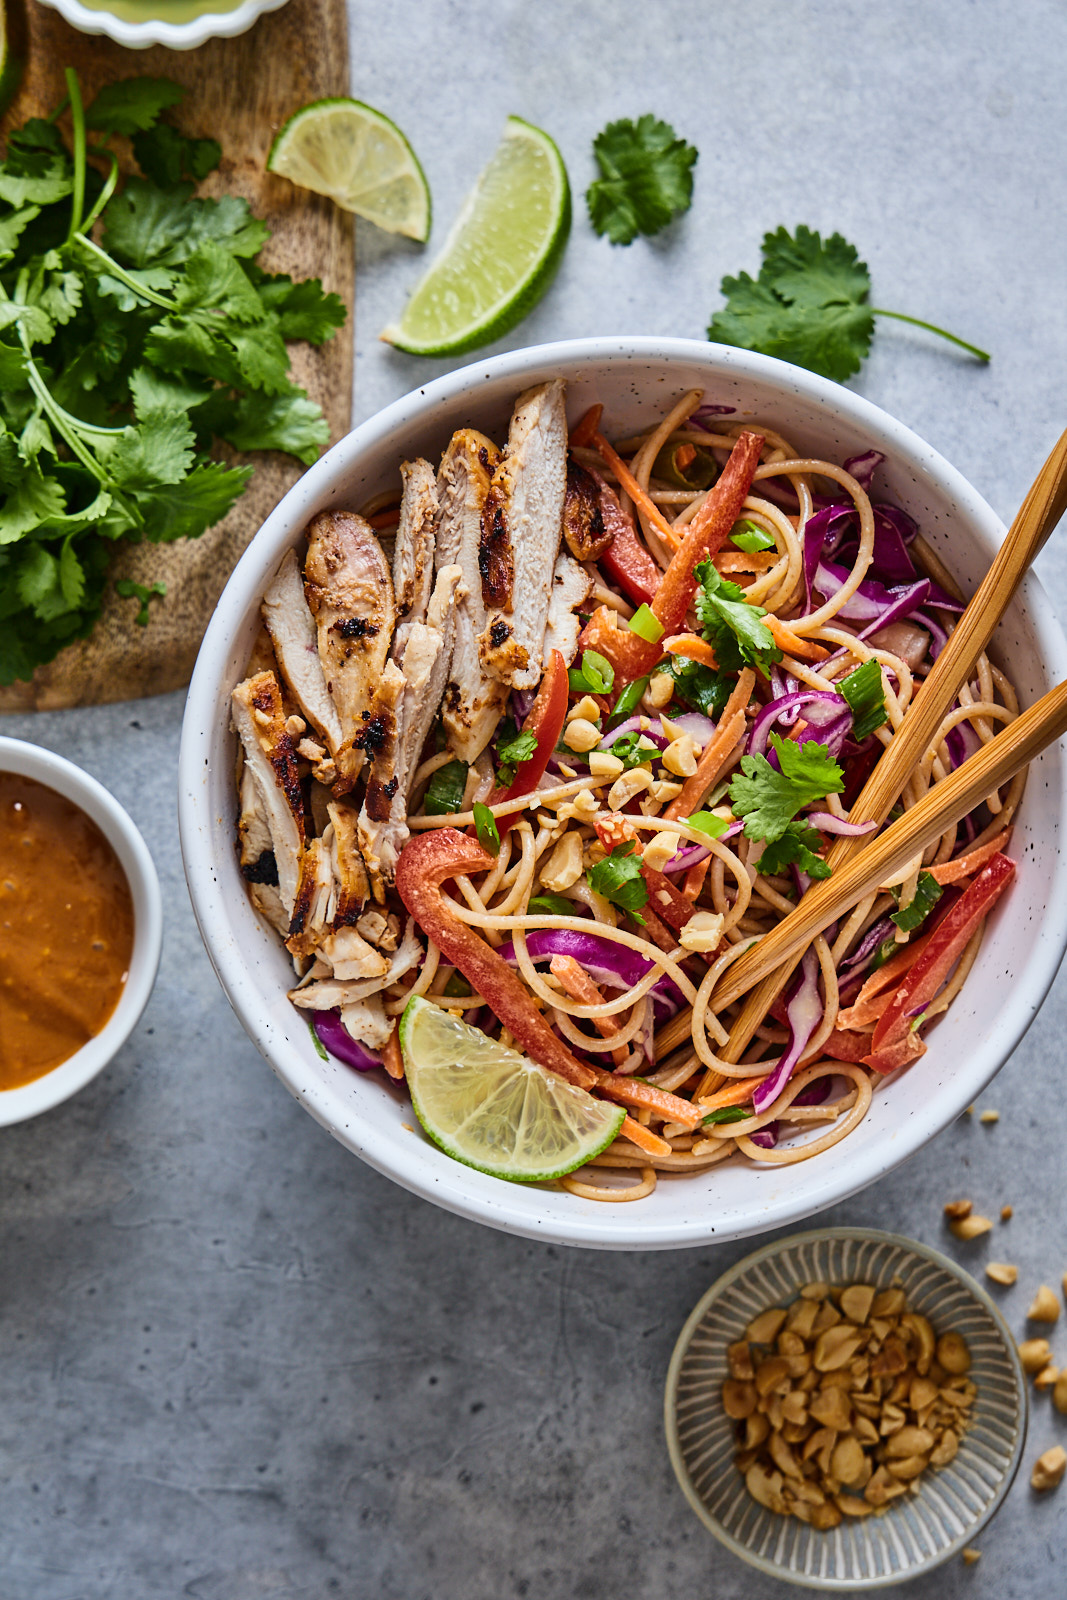 Cold Peanut Noodle Salad With Grilled Chicken